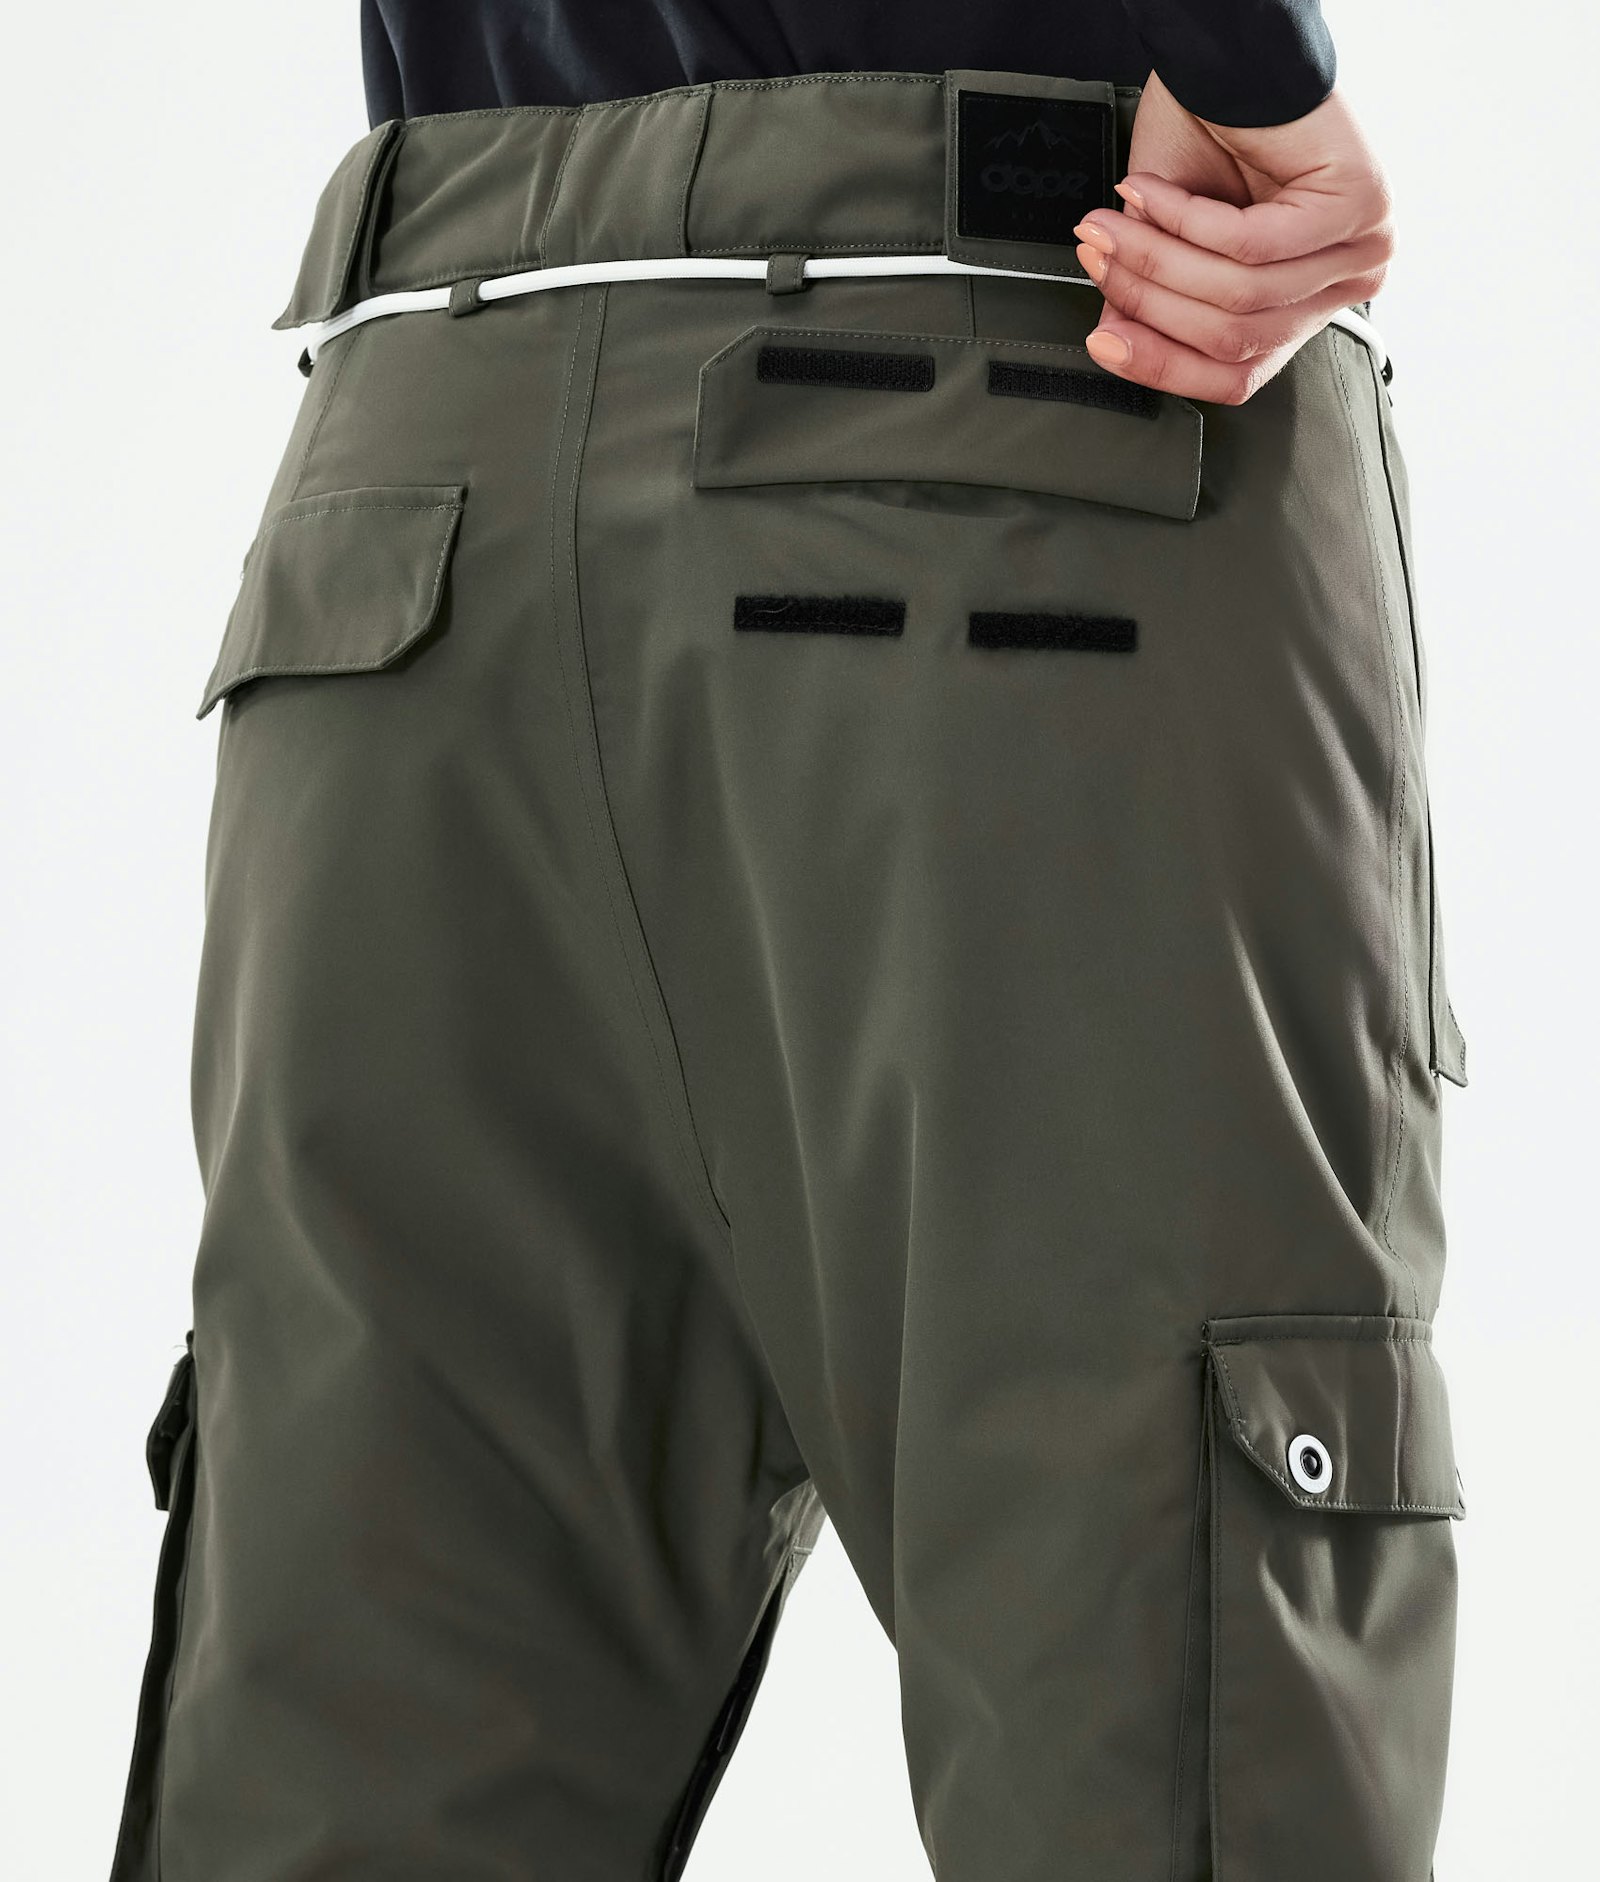 Iconic W 2021 Pantalones Esquí Mujer Olive Green